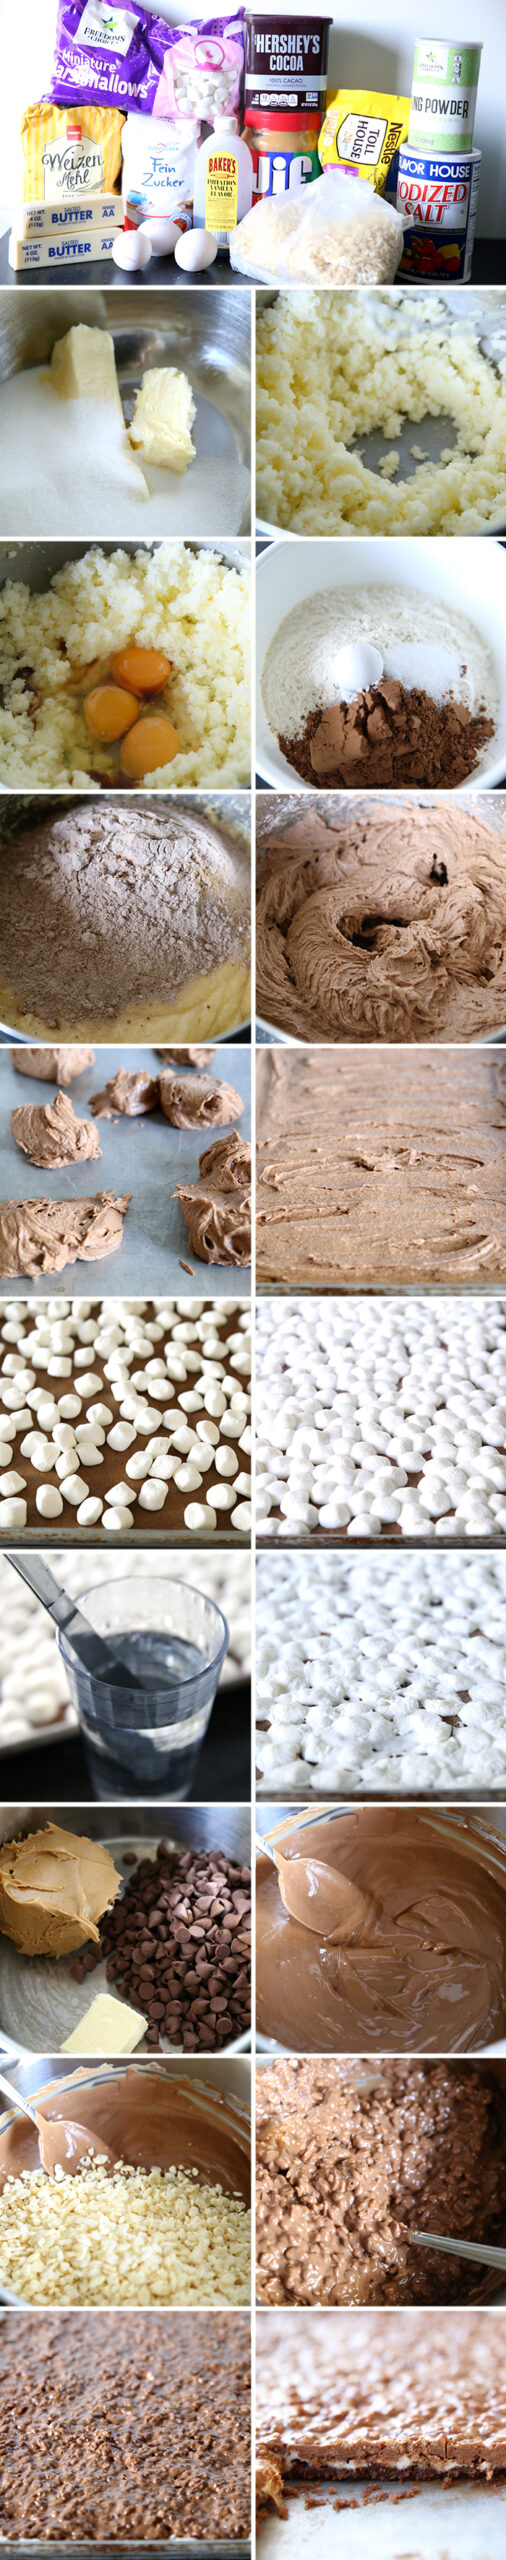 19-picture photo collage of step-by-step pictures of how to make peanut butter crunch brownies with marshmallows.